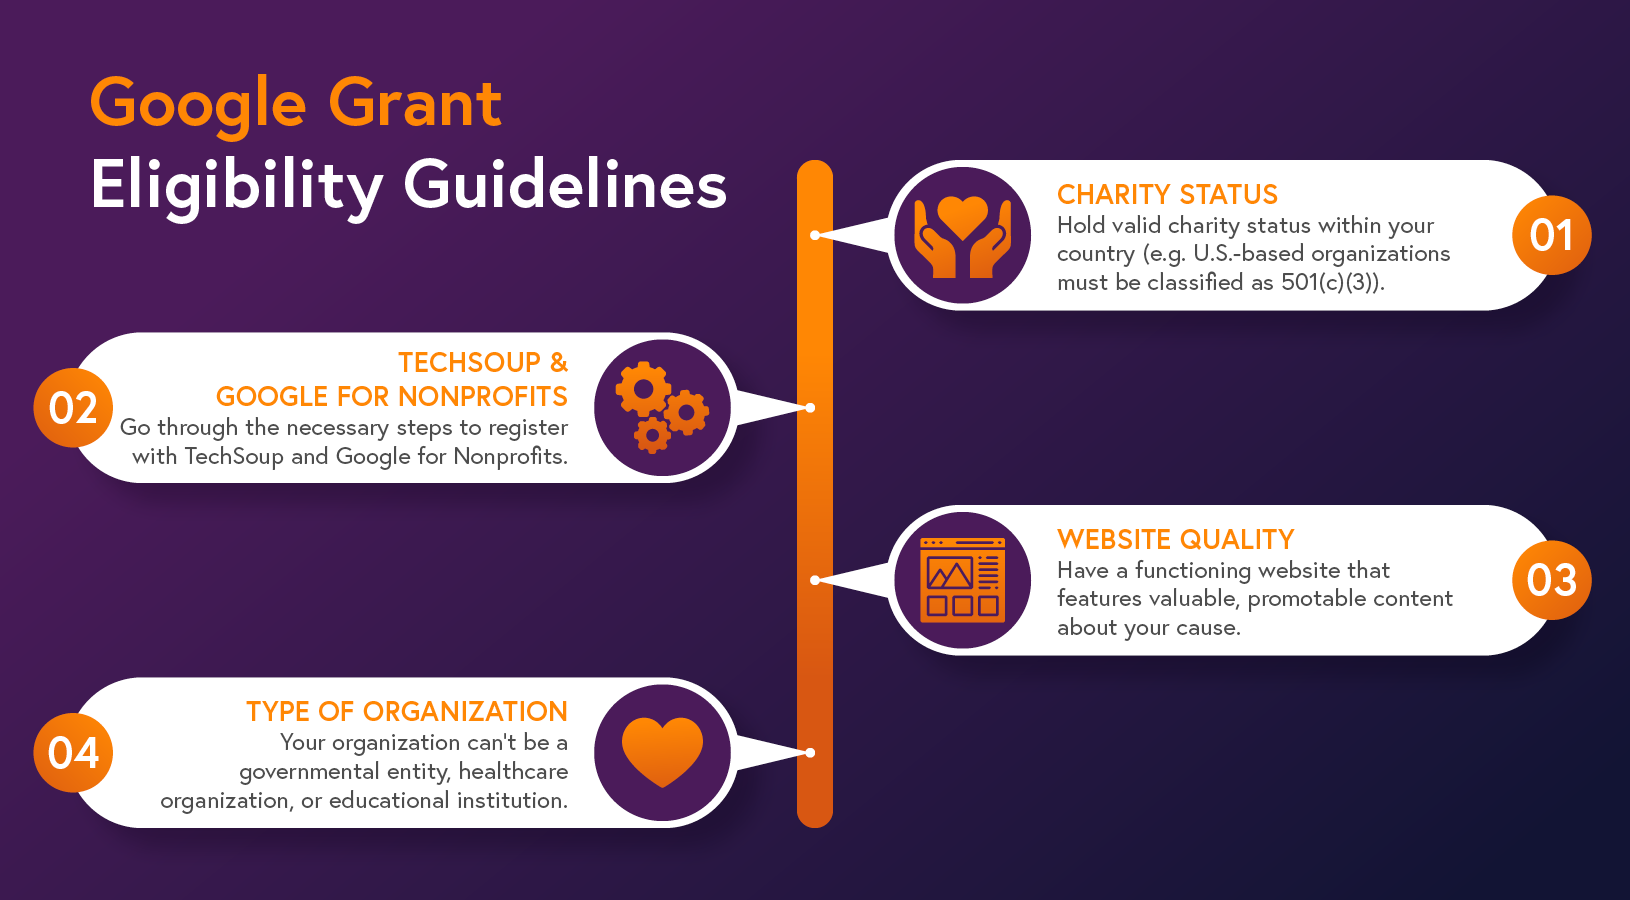 Make sure your organization follows these Google Ad Grant eligibility guidelines.